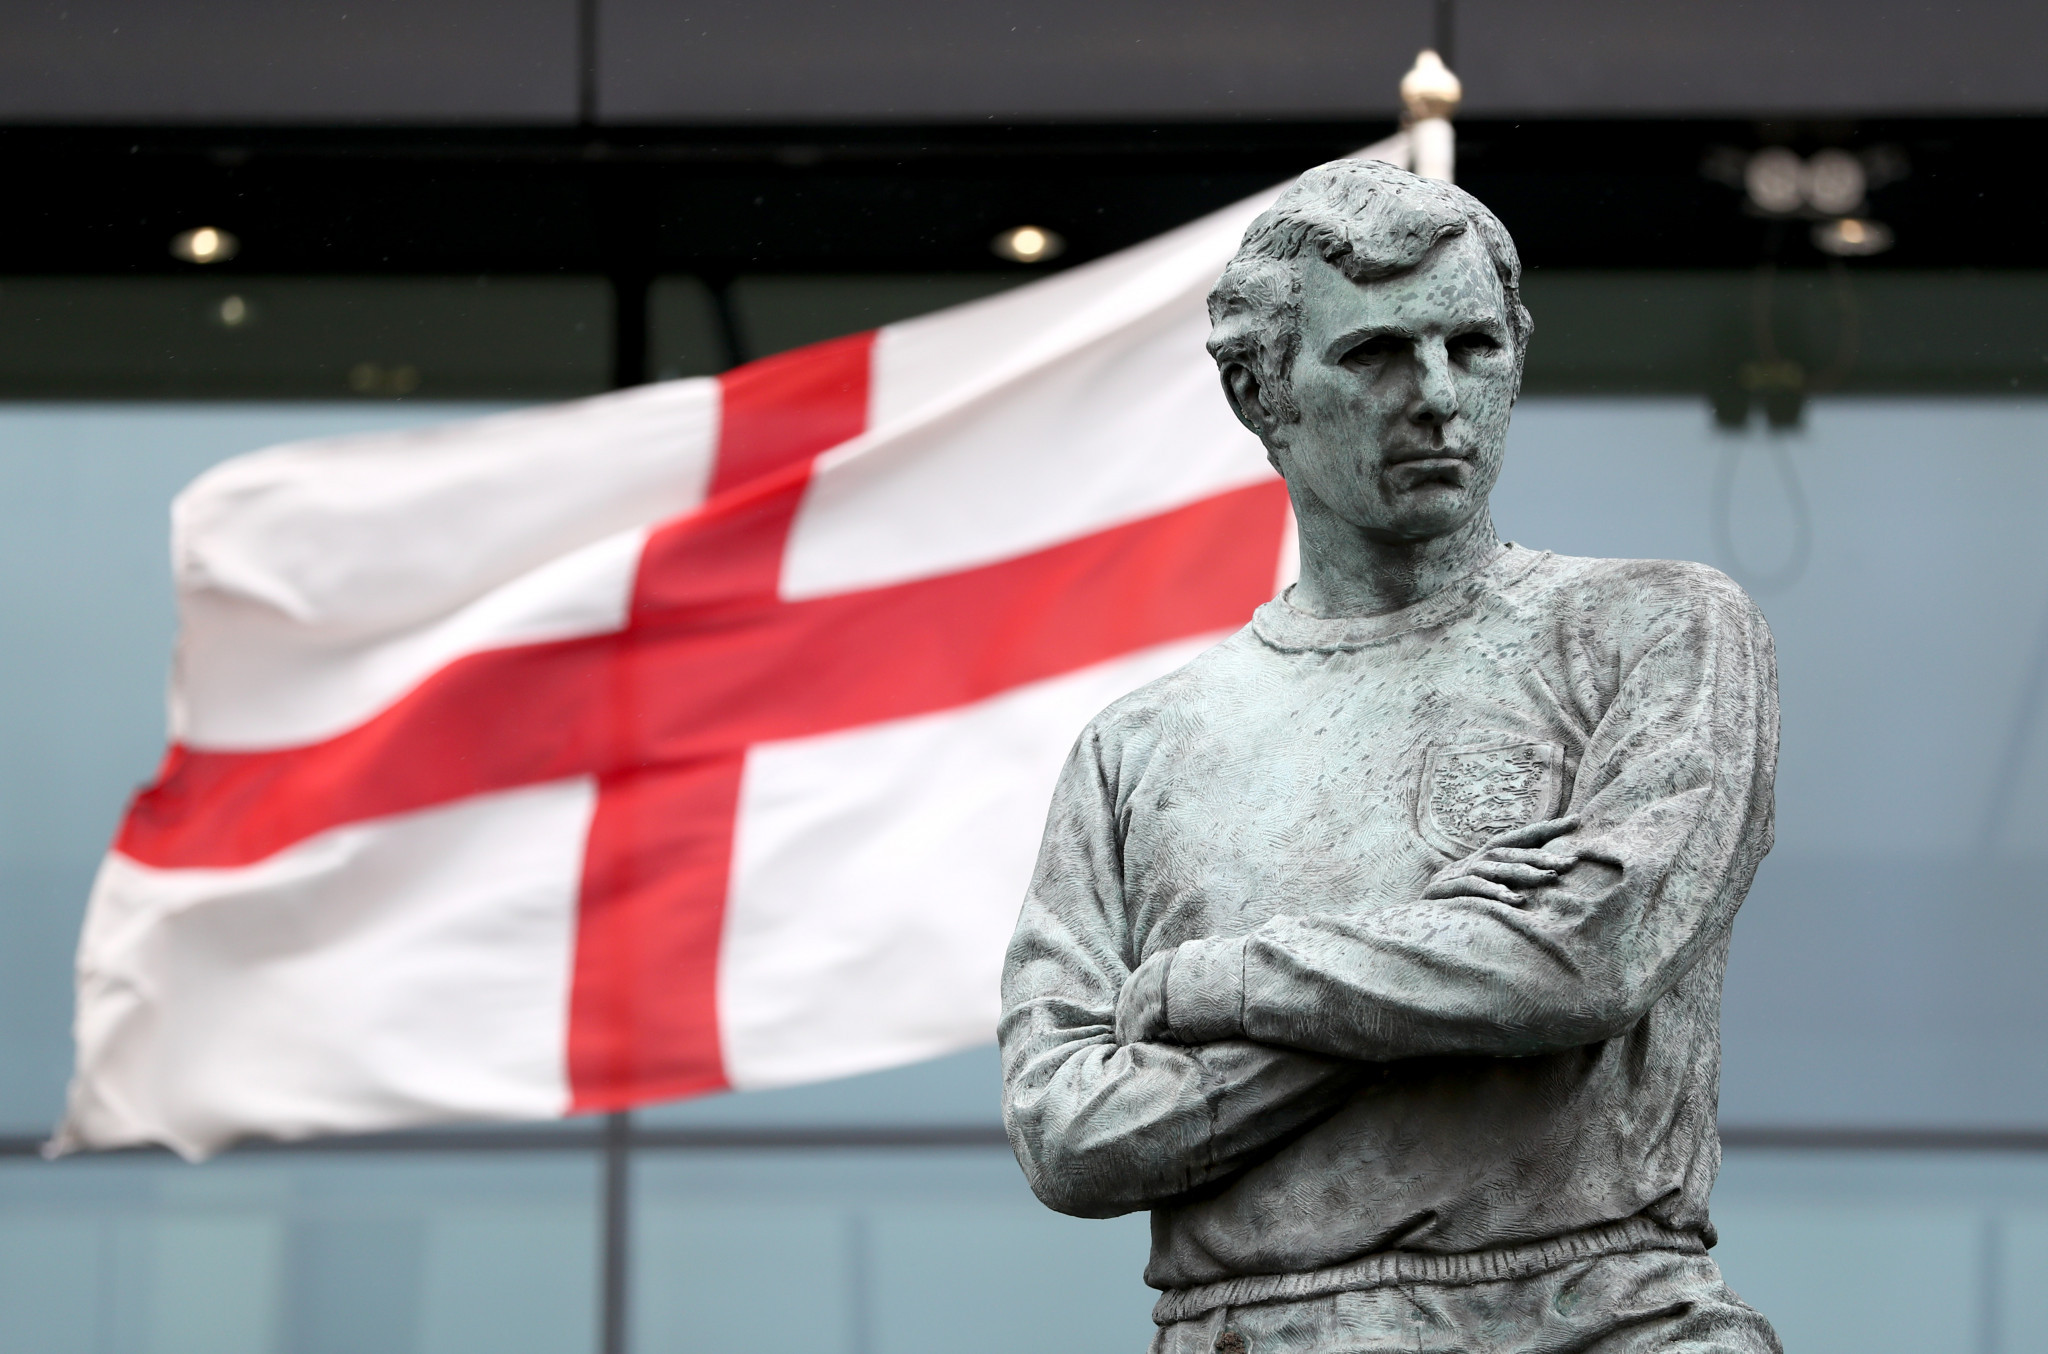 The Bobby Moore statue at Wembley Stadium ©Getty Images